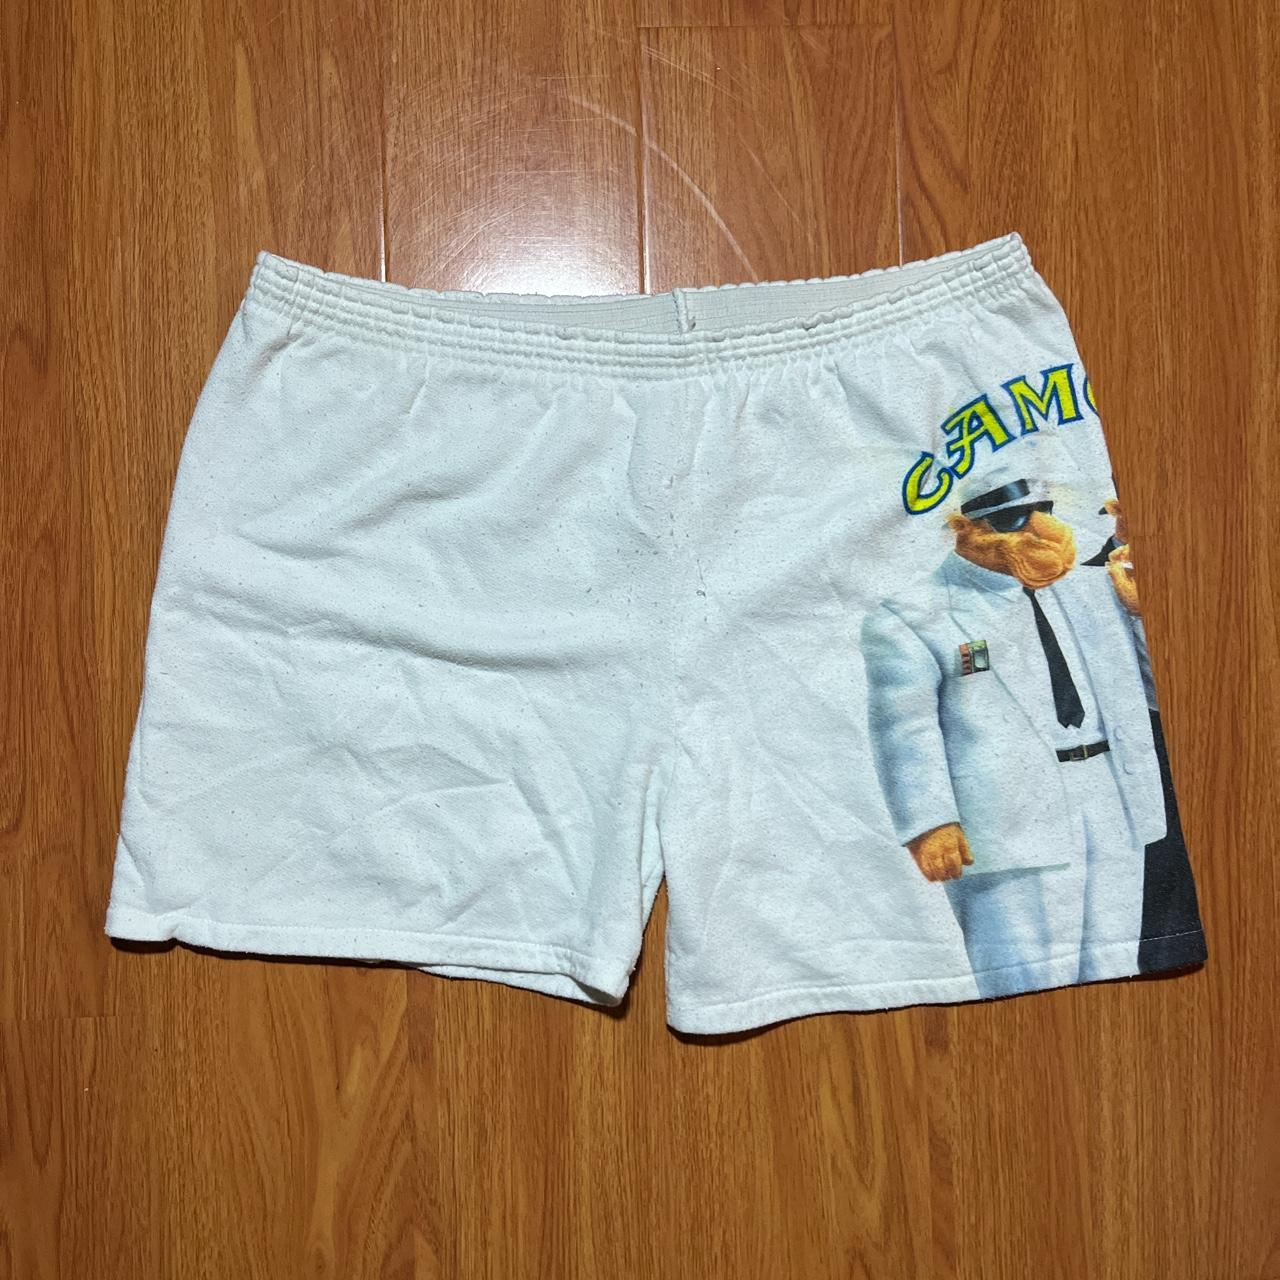 Camel Men's White and Yellow Shorts (2)